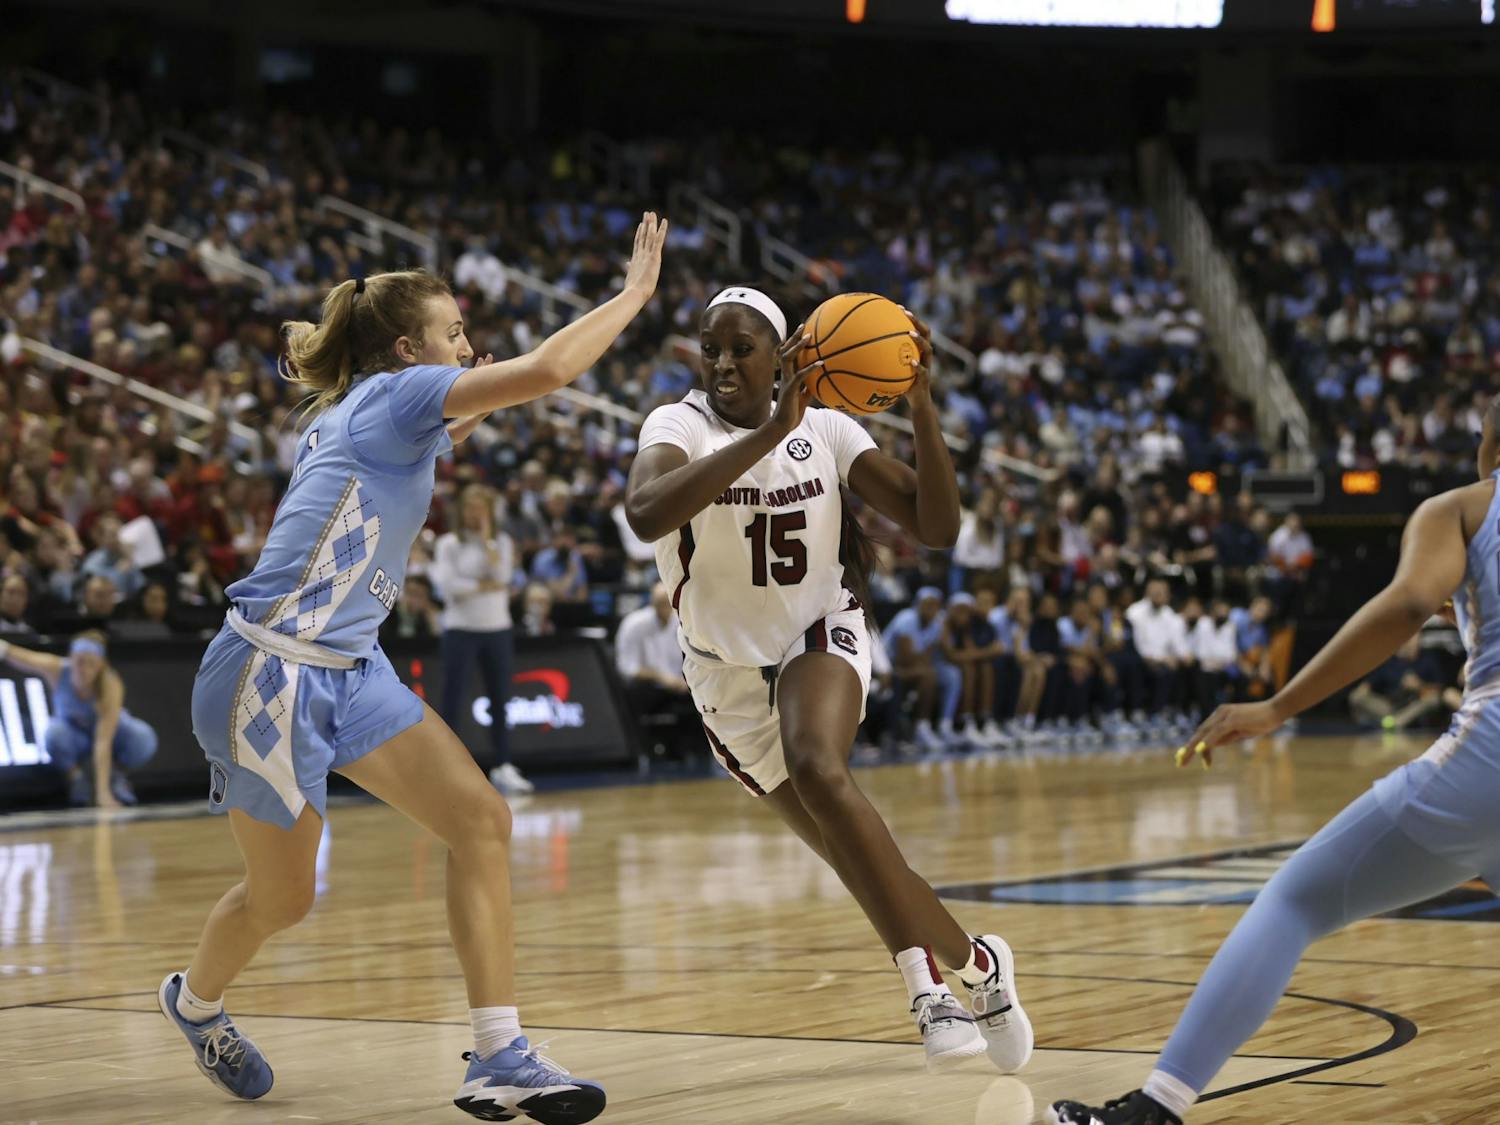 Junior forward Laeticia Amihere drives in the paint during the third quarter of South Carolina's 69-61 victory over North Carolina in the Sweet Sixteen on March 25, 2022.